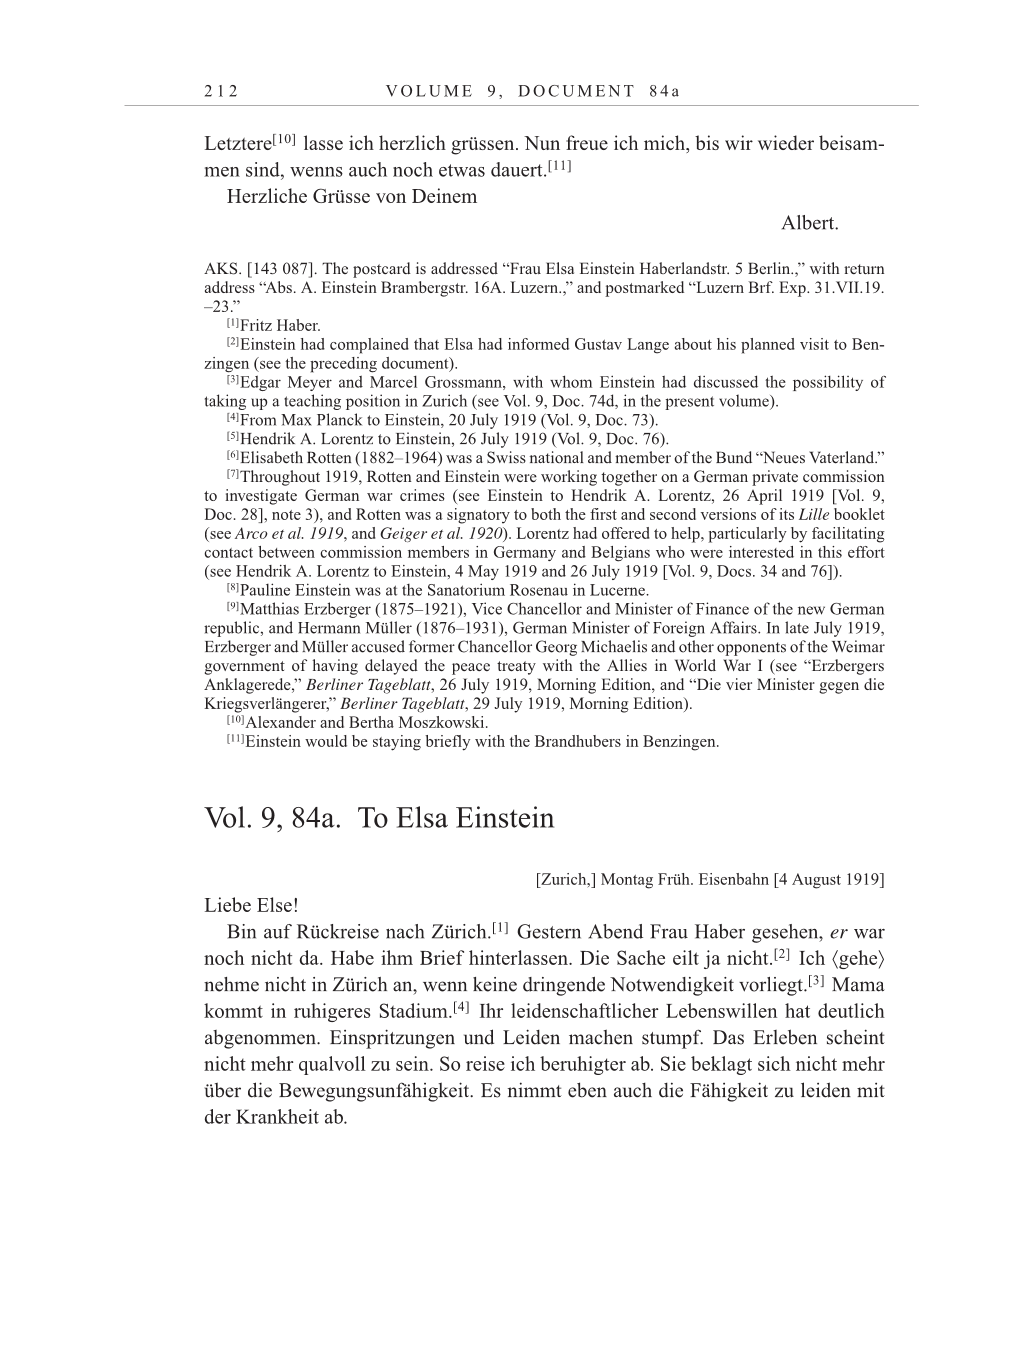 Volume 10: The Berlin Years: Correspondence May-December 1920 / Supplementary Correspondence 1909-1920 page 212